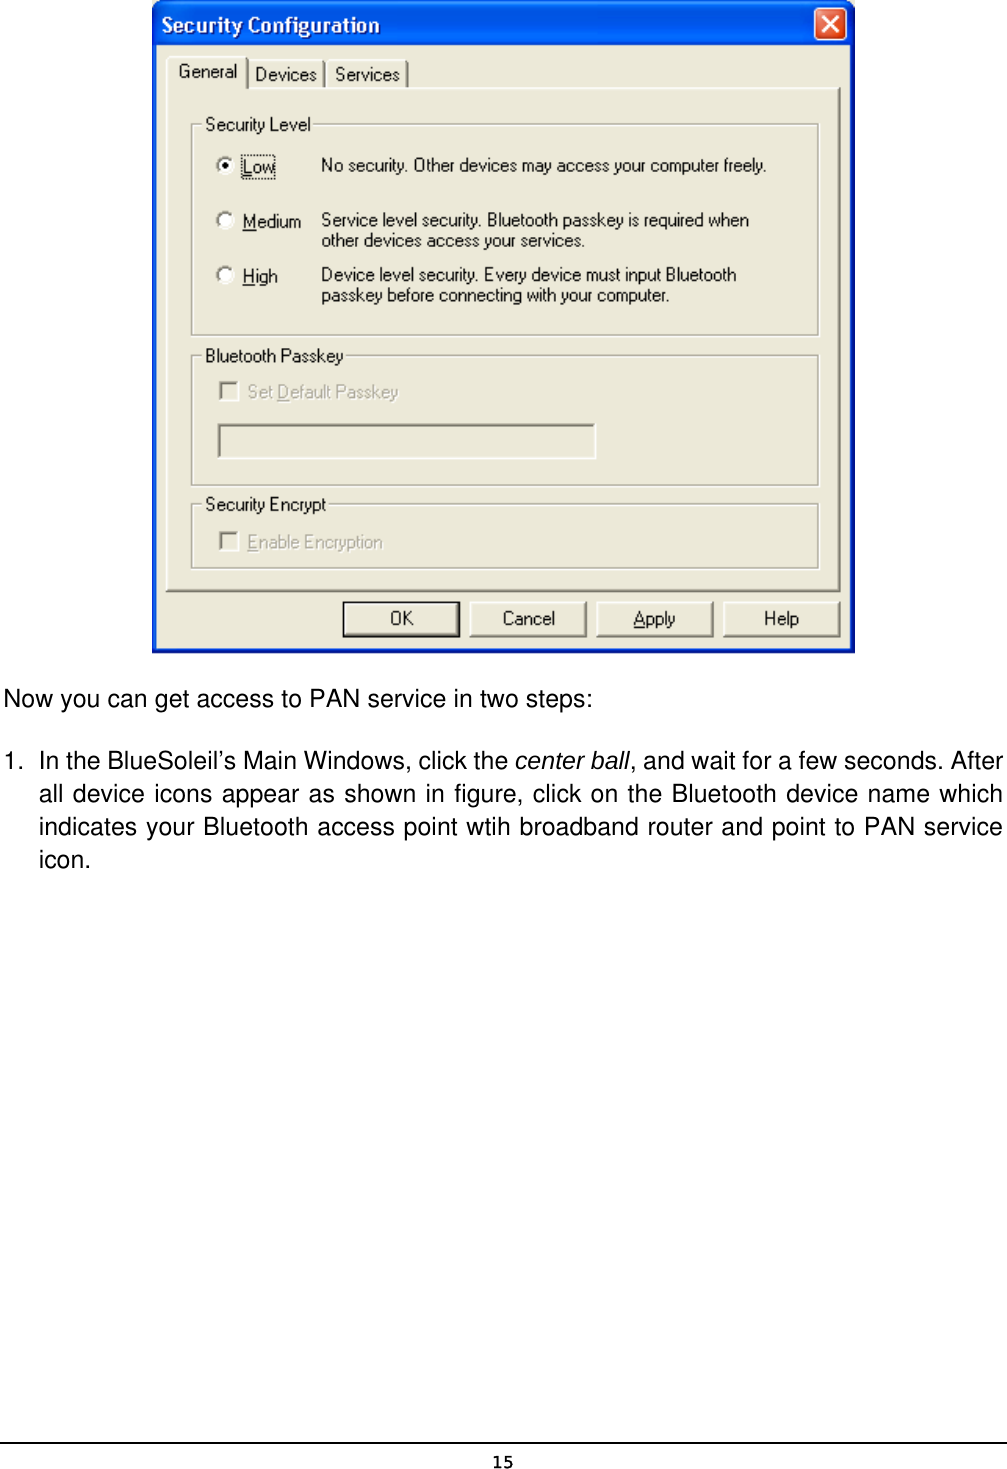   15 Now you can get access to PAN service in two steps: 1.  In the BlueSoleil’s Main Windows, click the center ball, and wait for a few seconds. After all device icons appear as shown in figure, click on the Bluetooth device name which indicates your Bluetooth access point wtih broadband router and point to PAN service icon. 